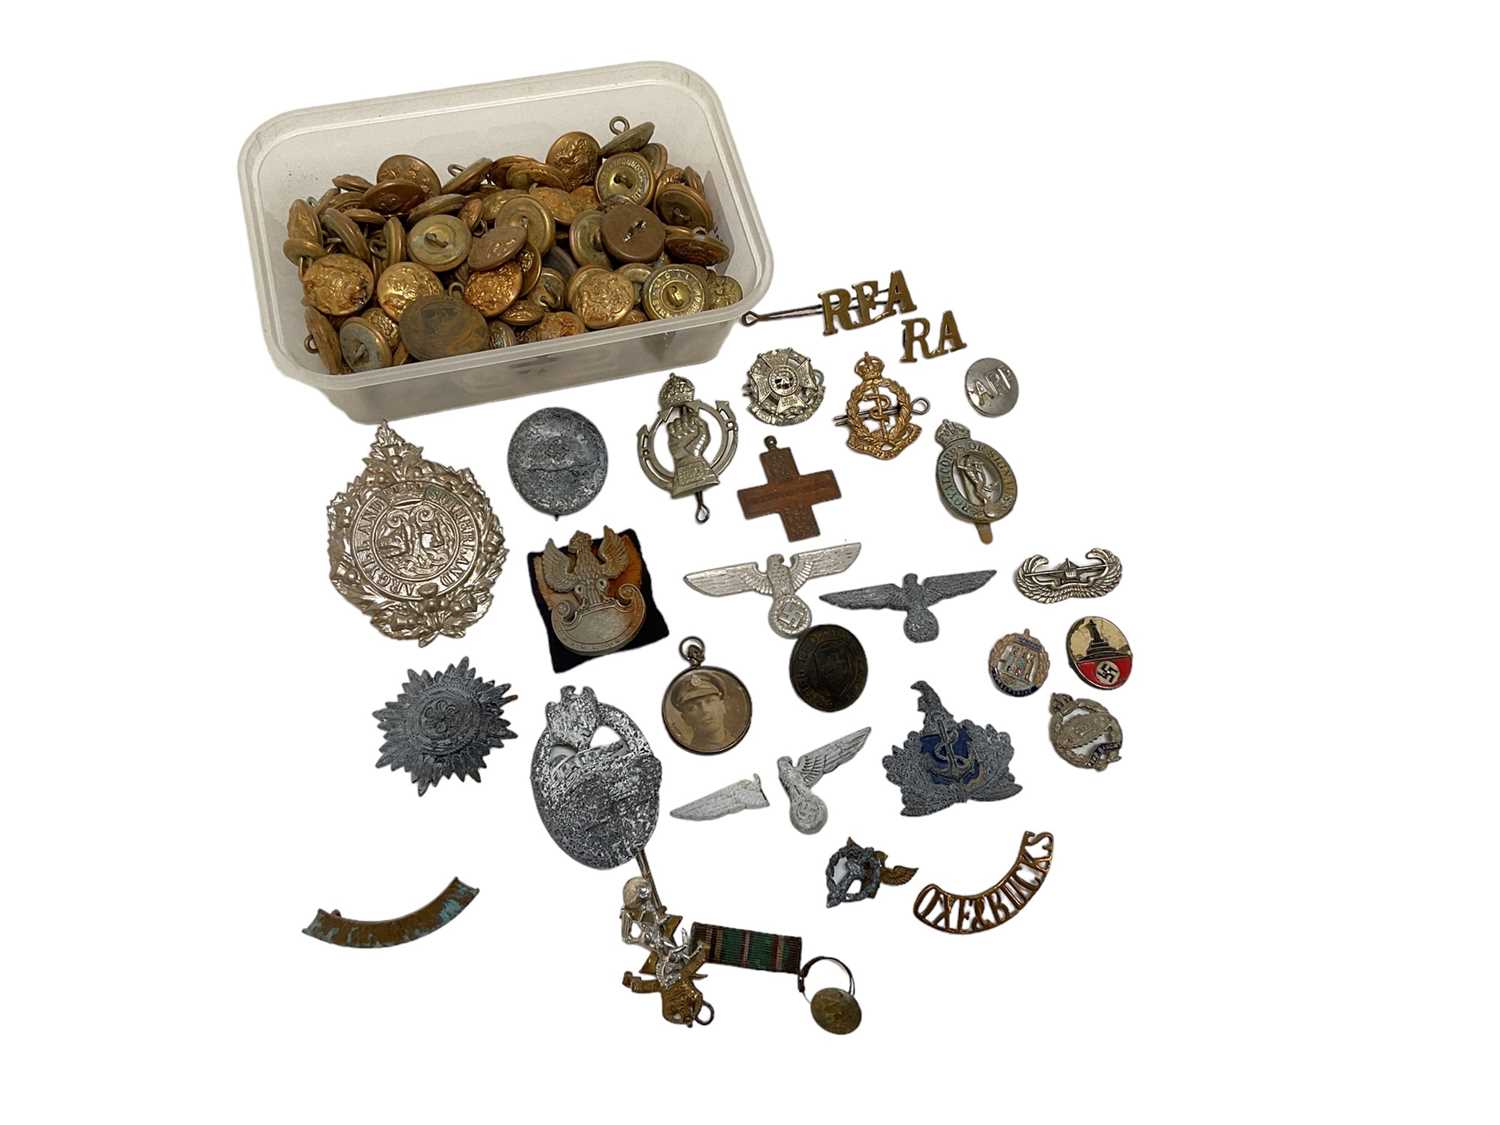 Second World War Polish Wartime economy issue plastic cap badge, group of Nazi badges and other mili